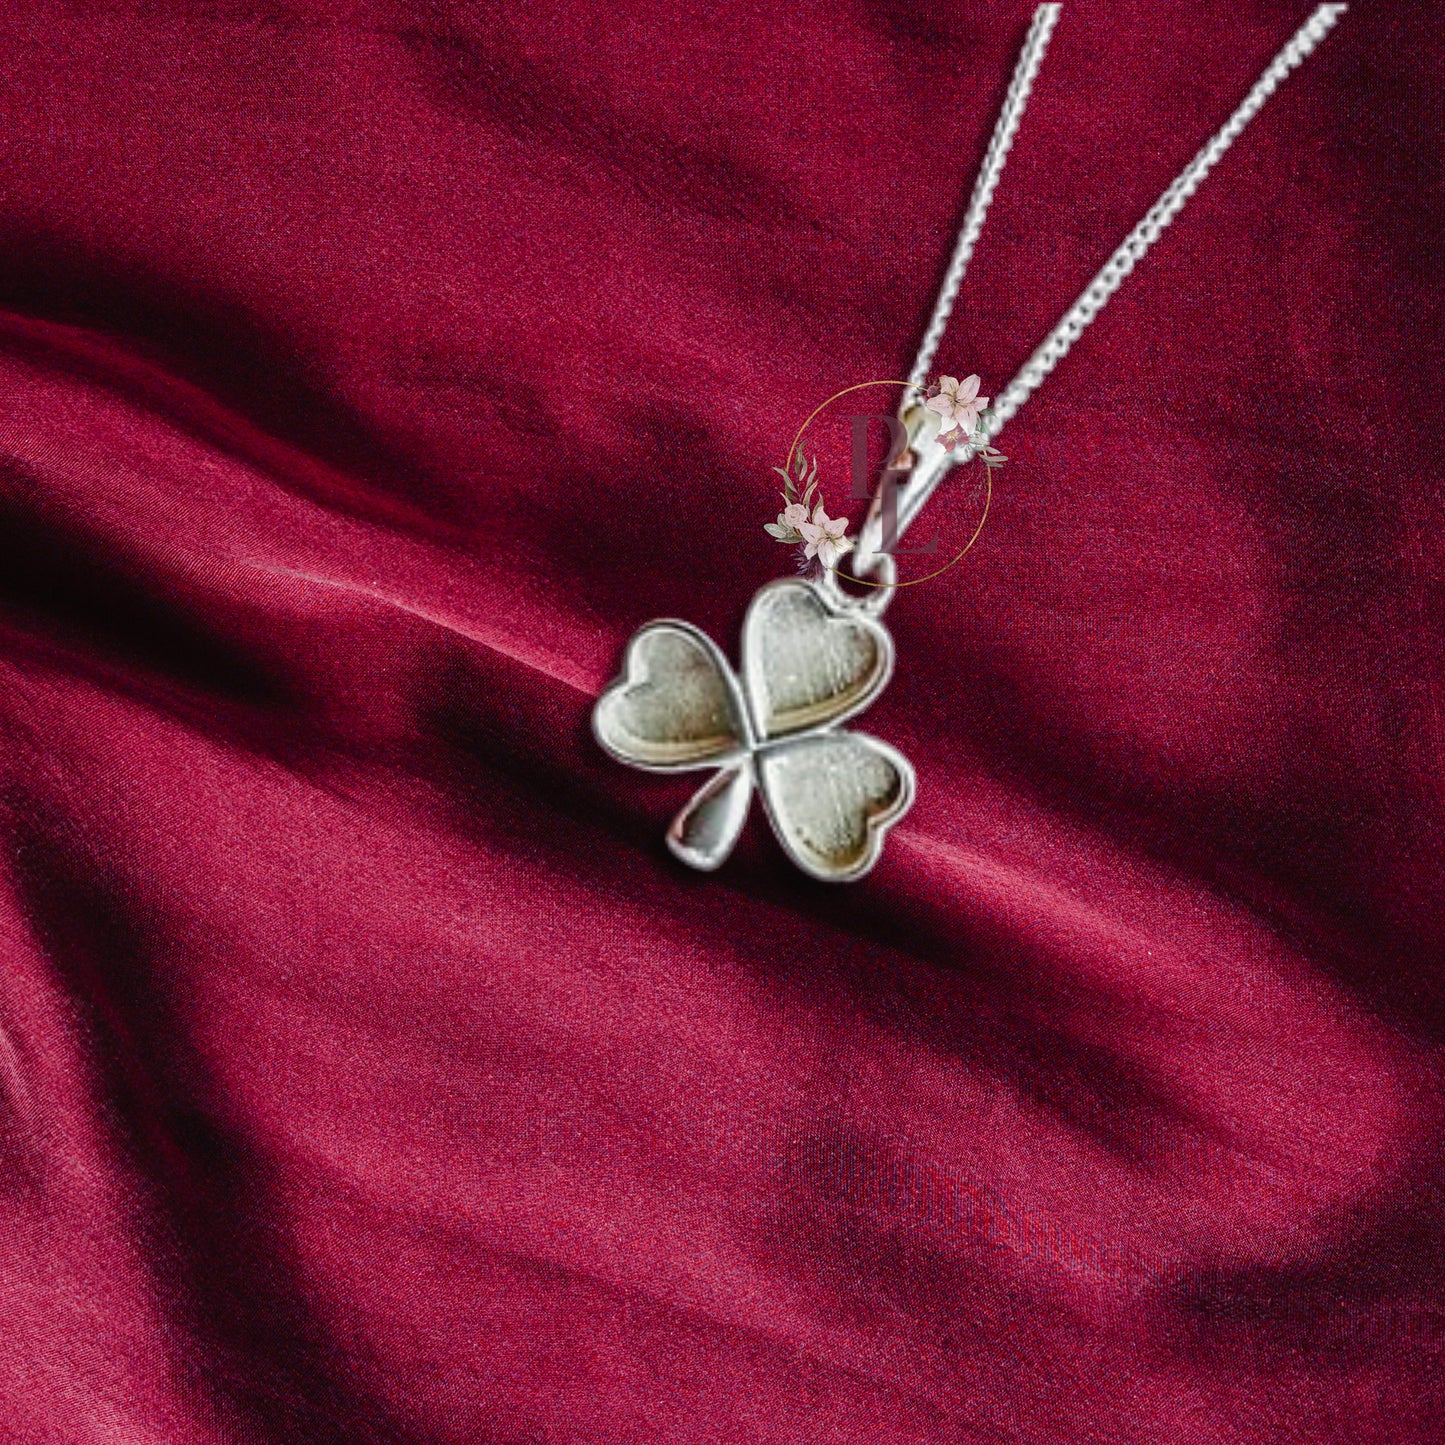 Aisling - Clover Breastmilk Necklace